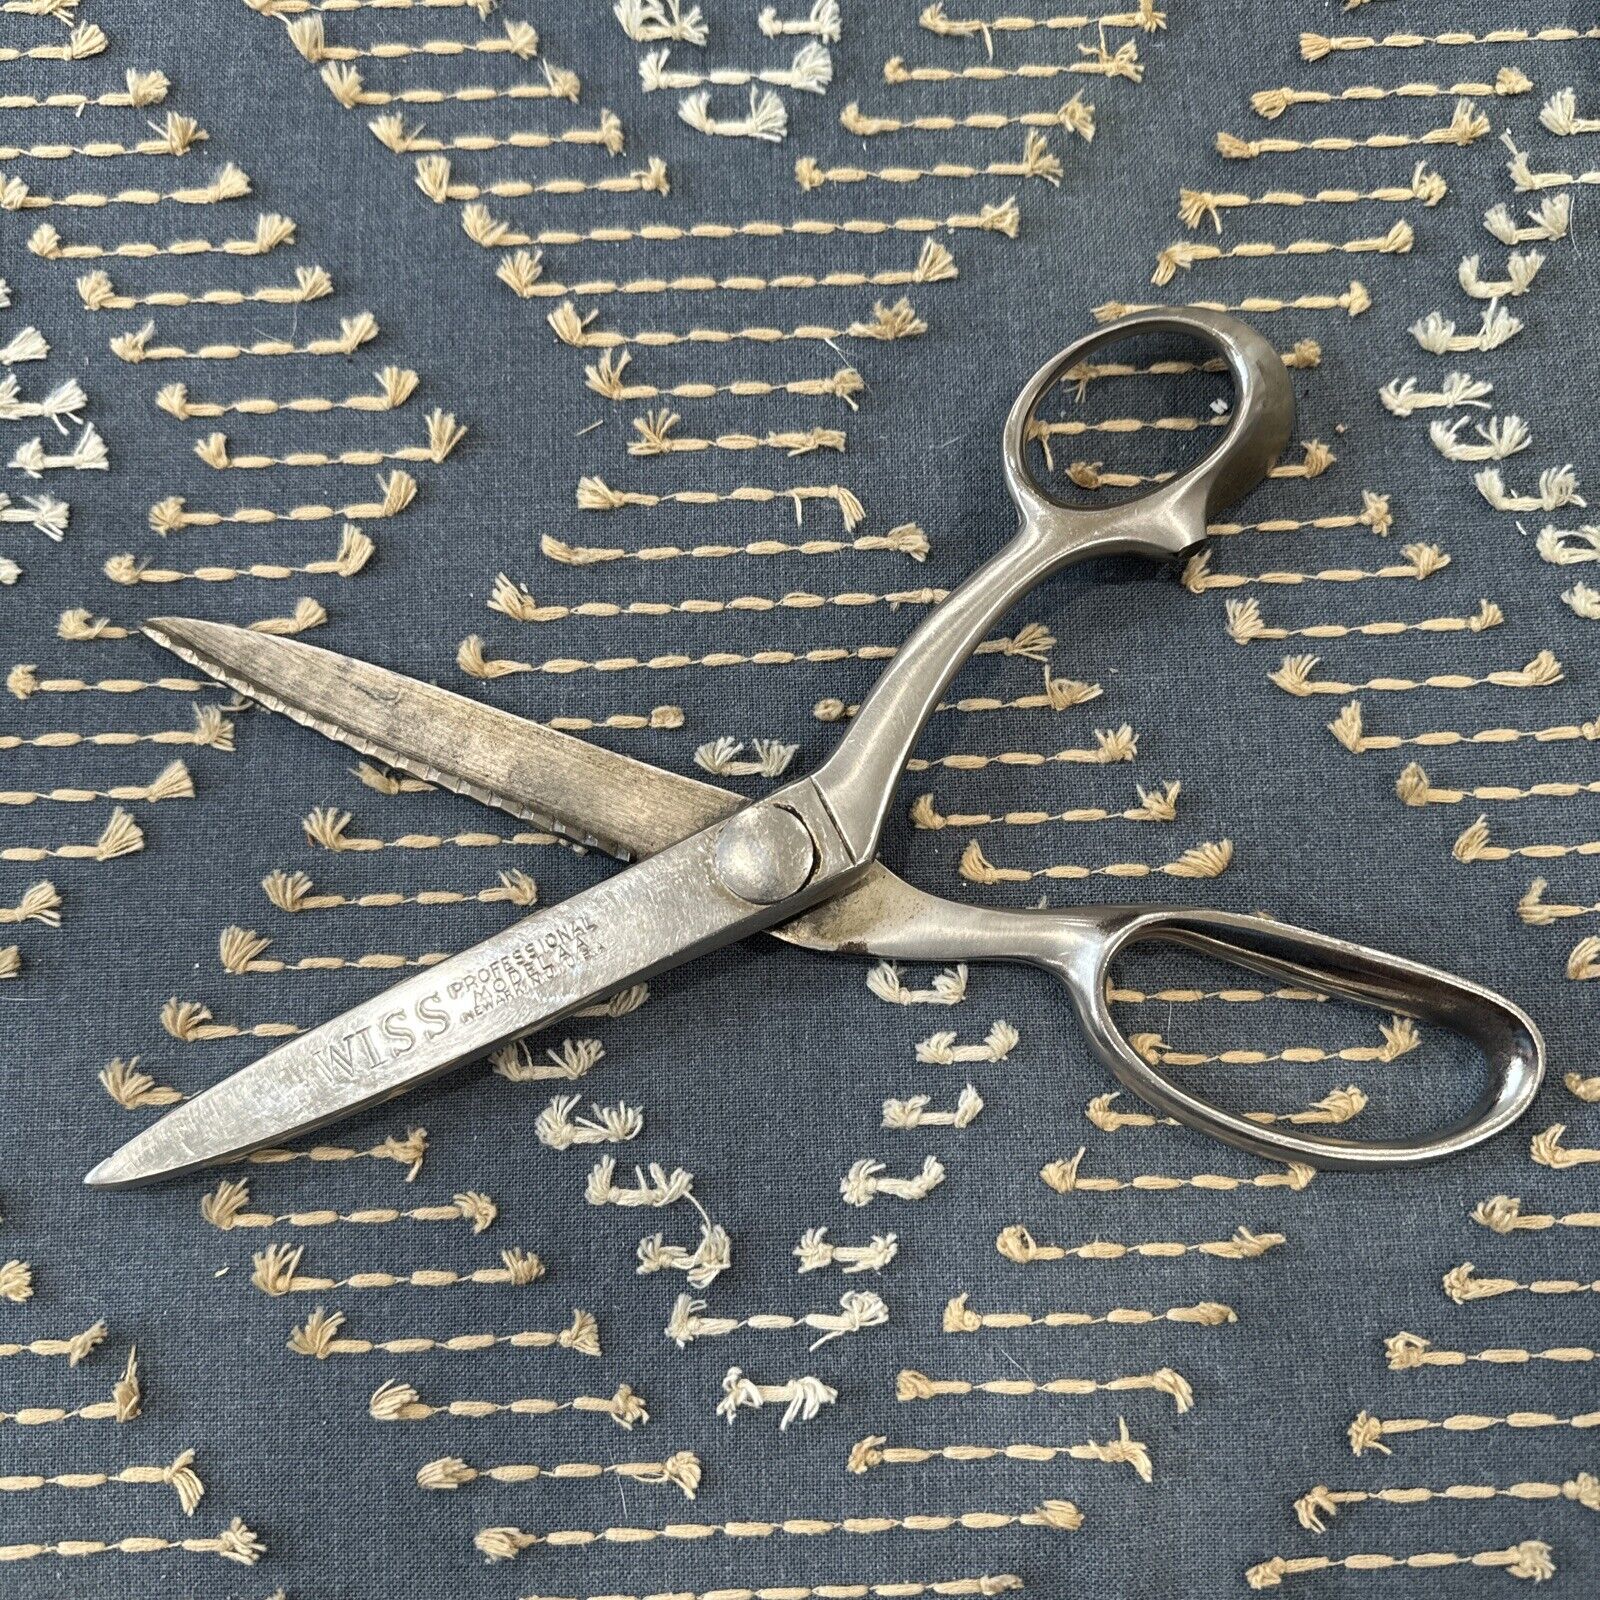 Vintage Wiss Professional Model AA Pinking Shears Tailor Dressmaking Seamstress